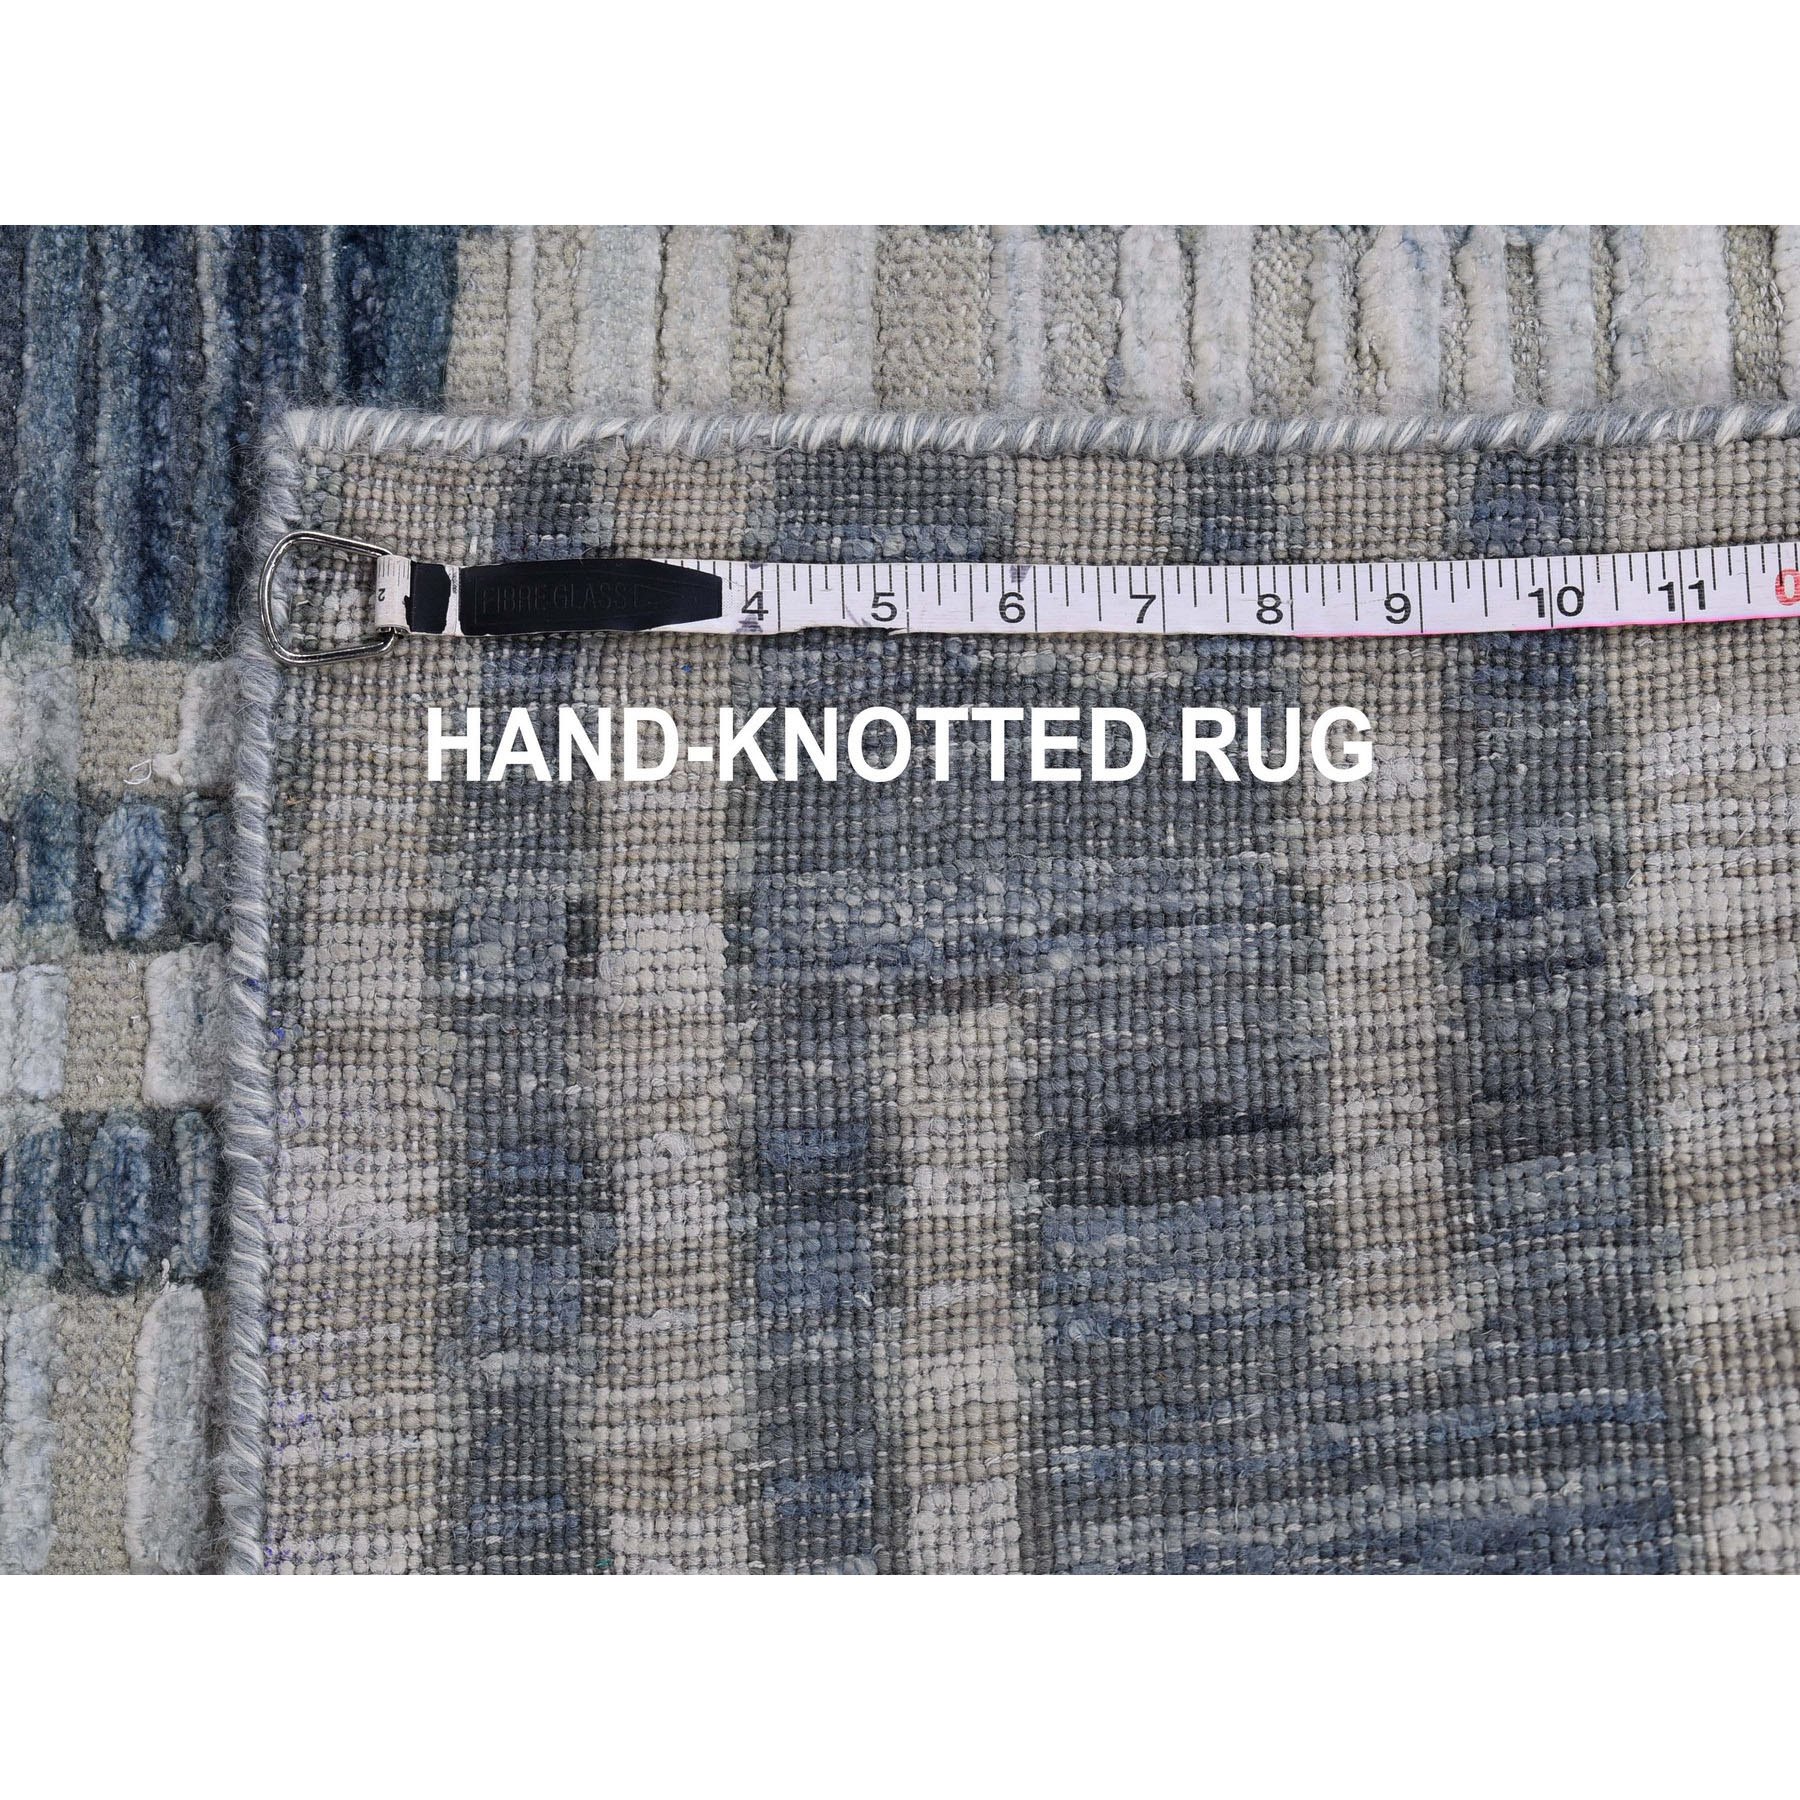 12'1"x15'3" Oversized Blue Pure Silk and Textured Wool Zigzag with Graph Design Hand Woven Oriental Rug 